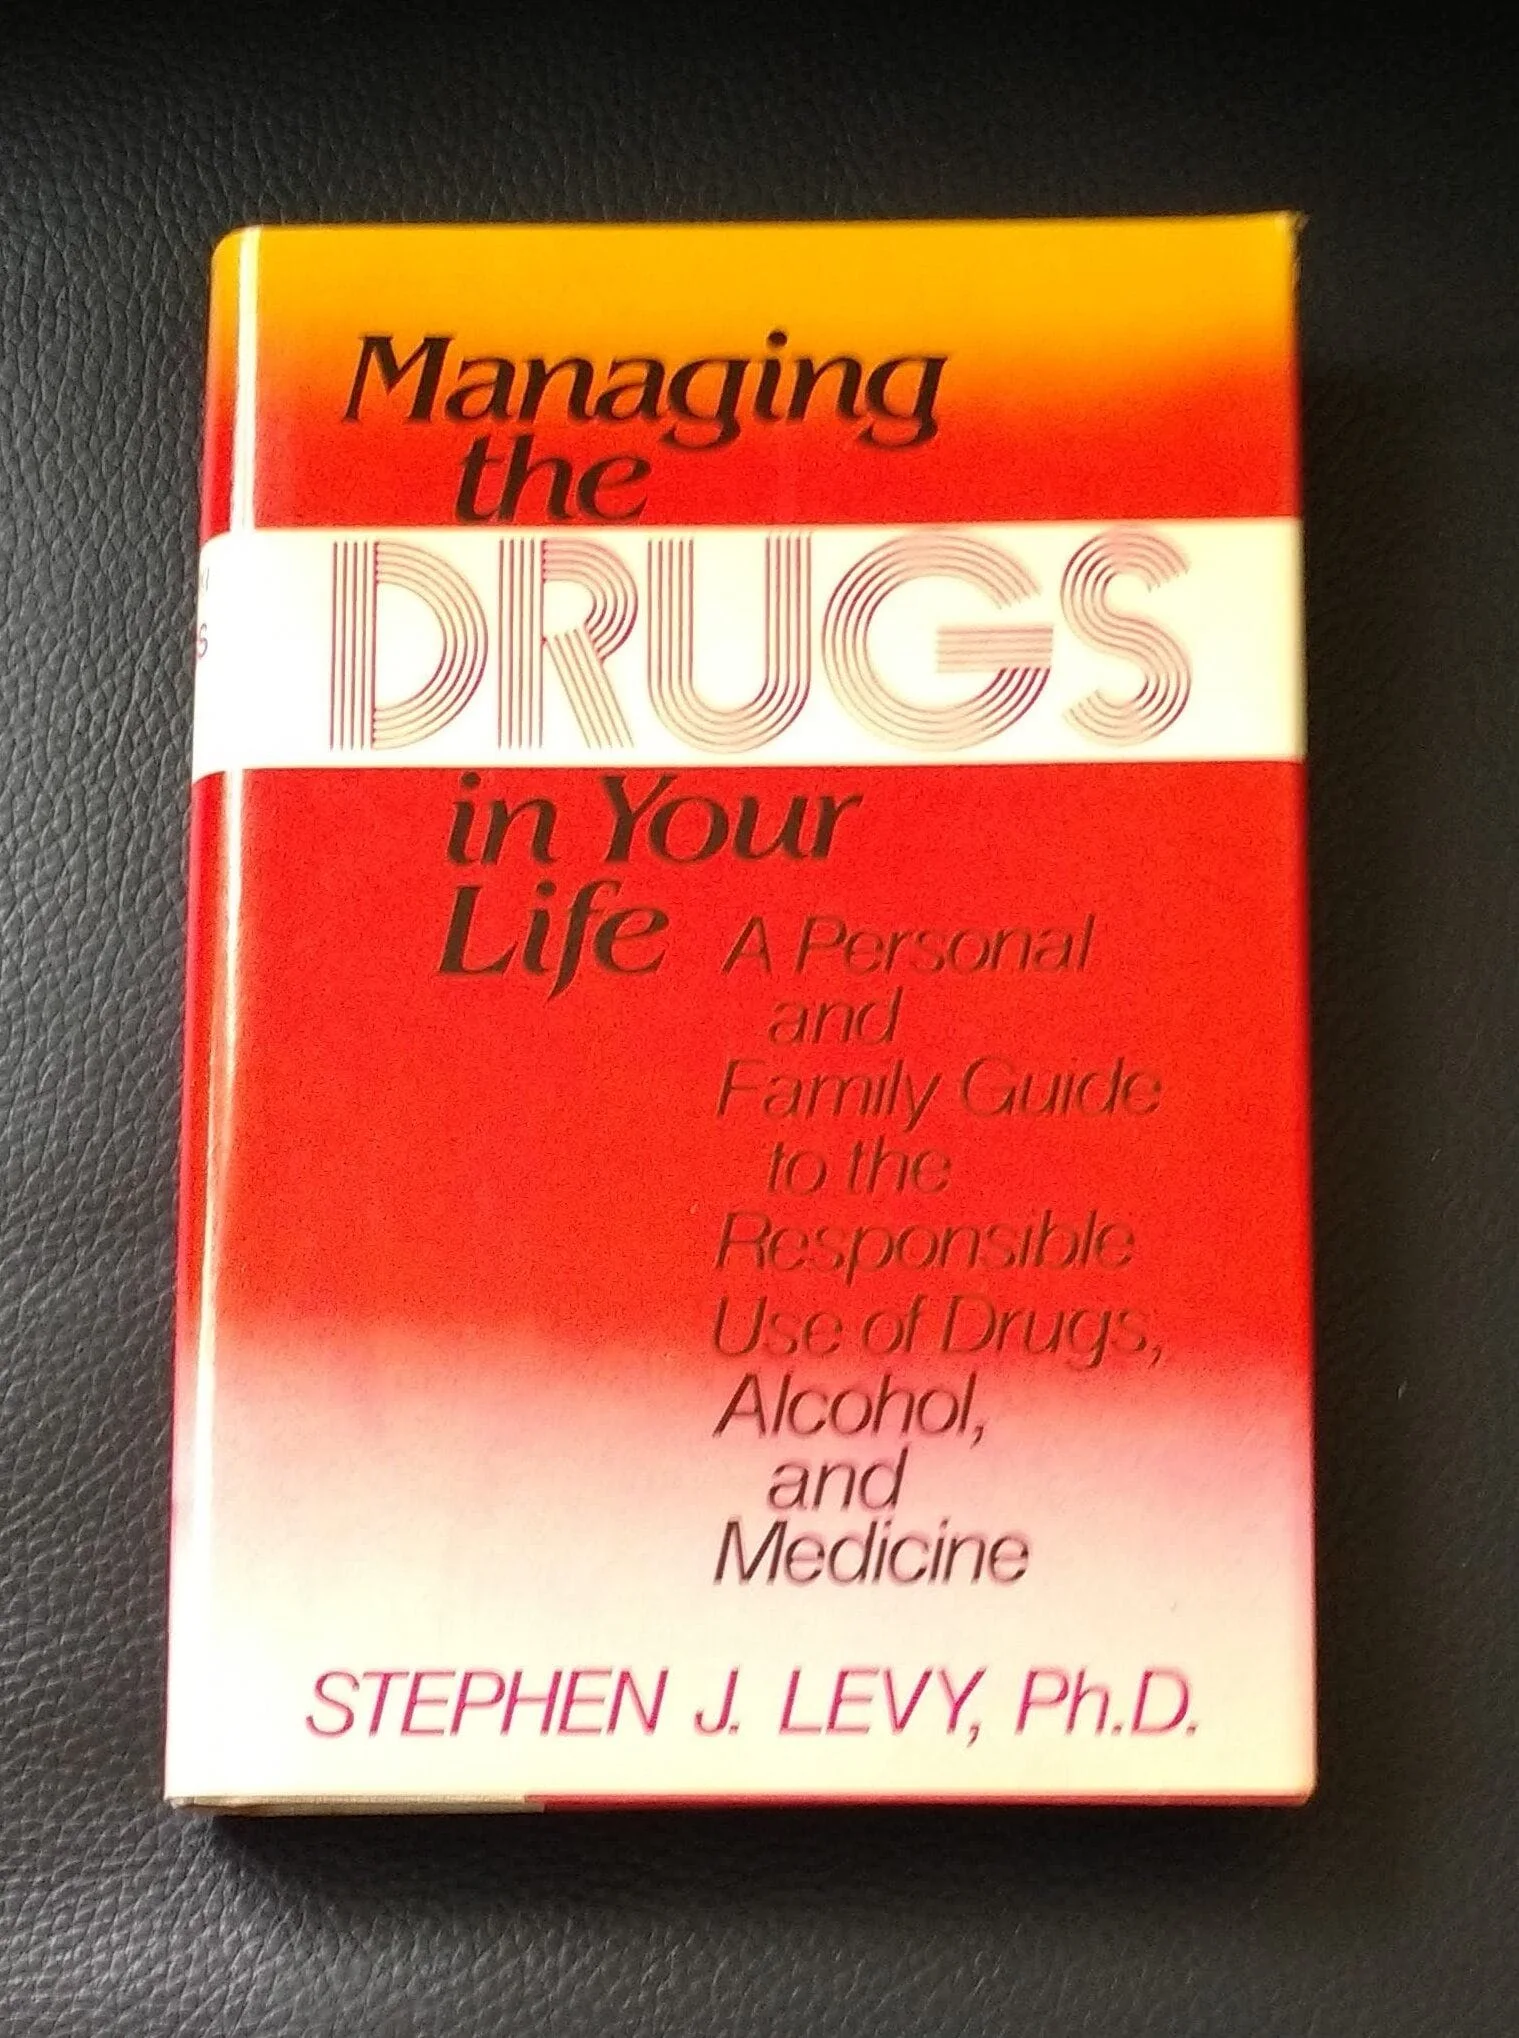 Managing the Drugs in your Life